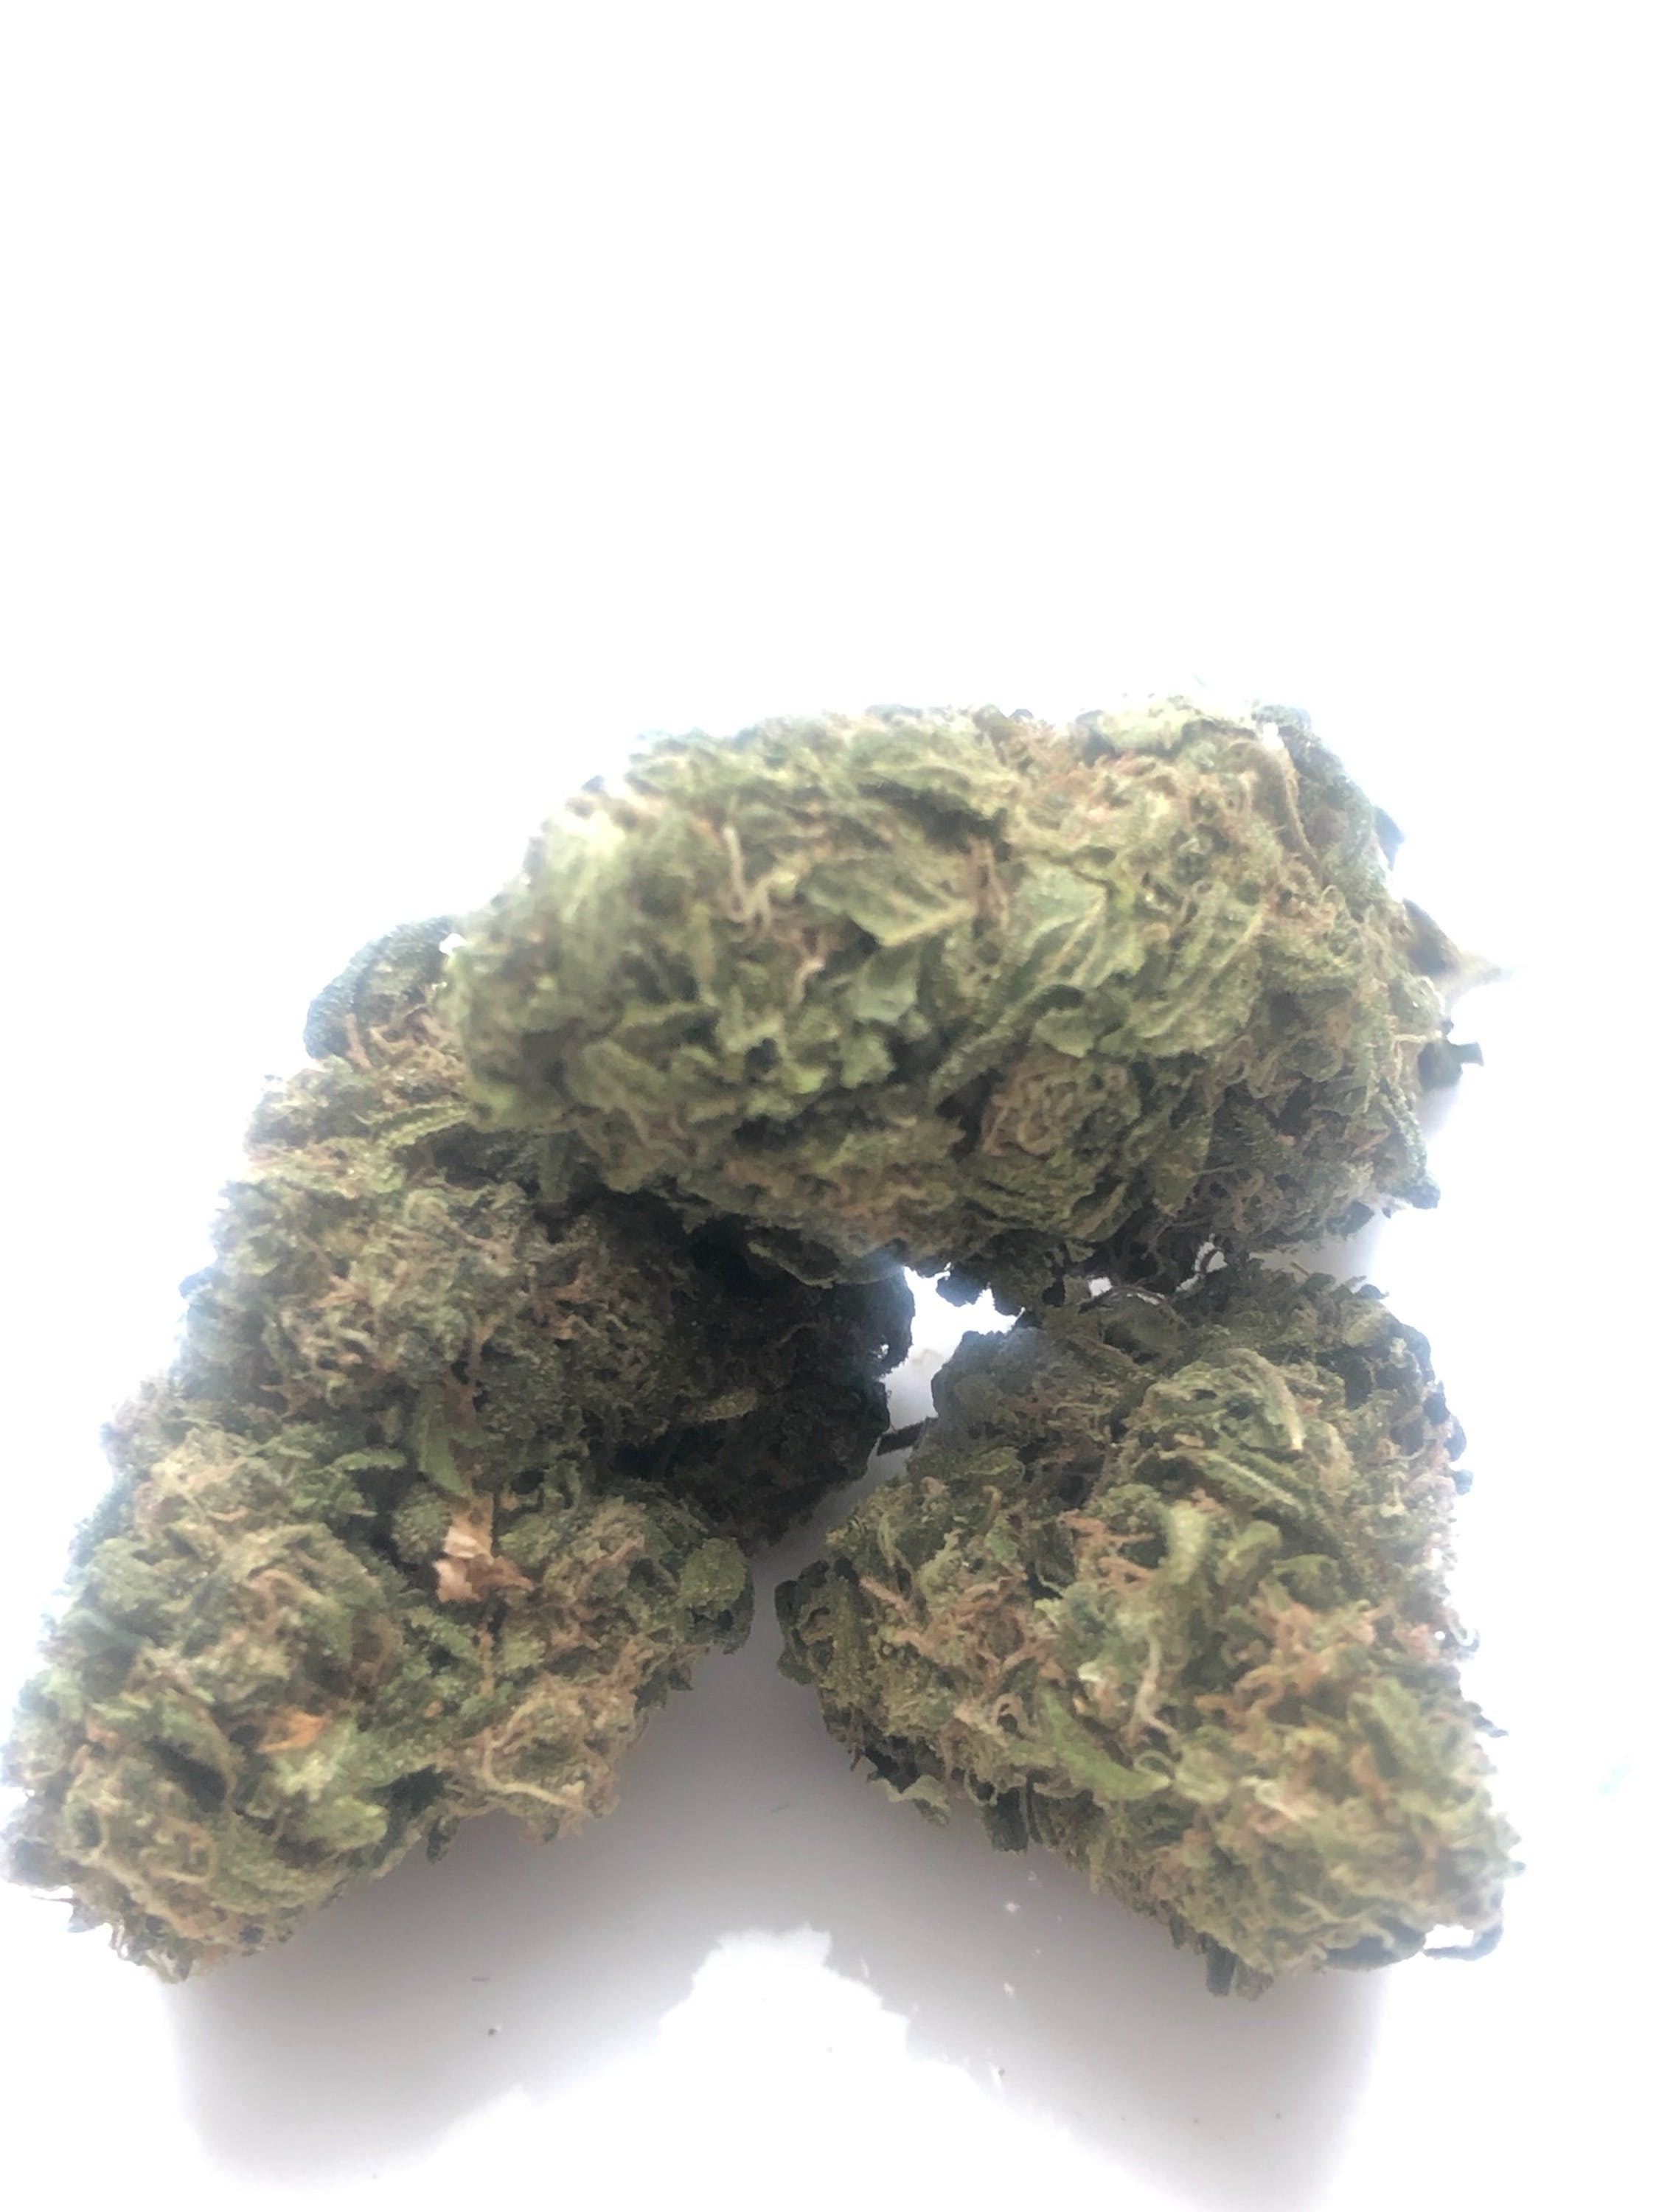 marijuana-dispensaries-by-appointment-only-2c-call-to-verify-fresno-space-monkey-og-24110-ounce-special